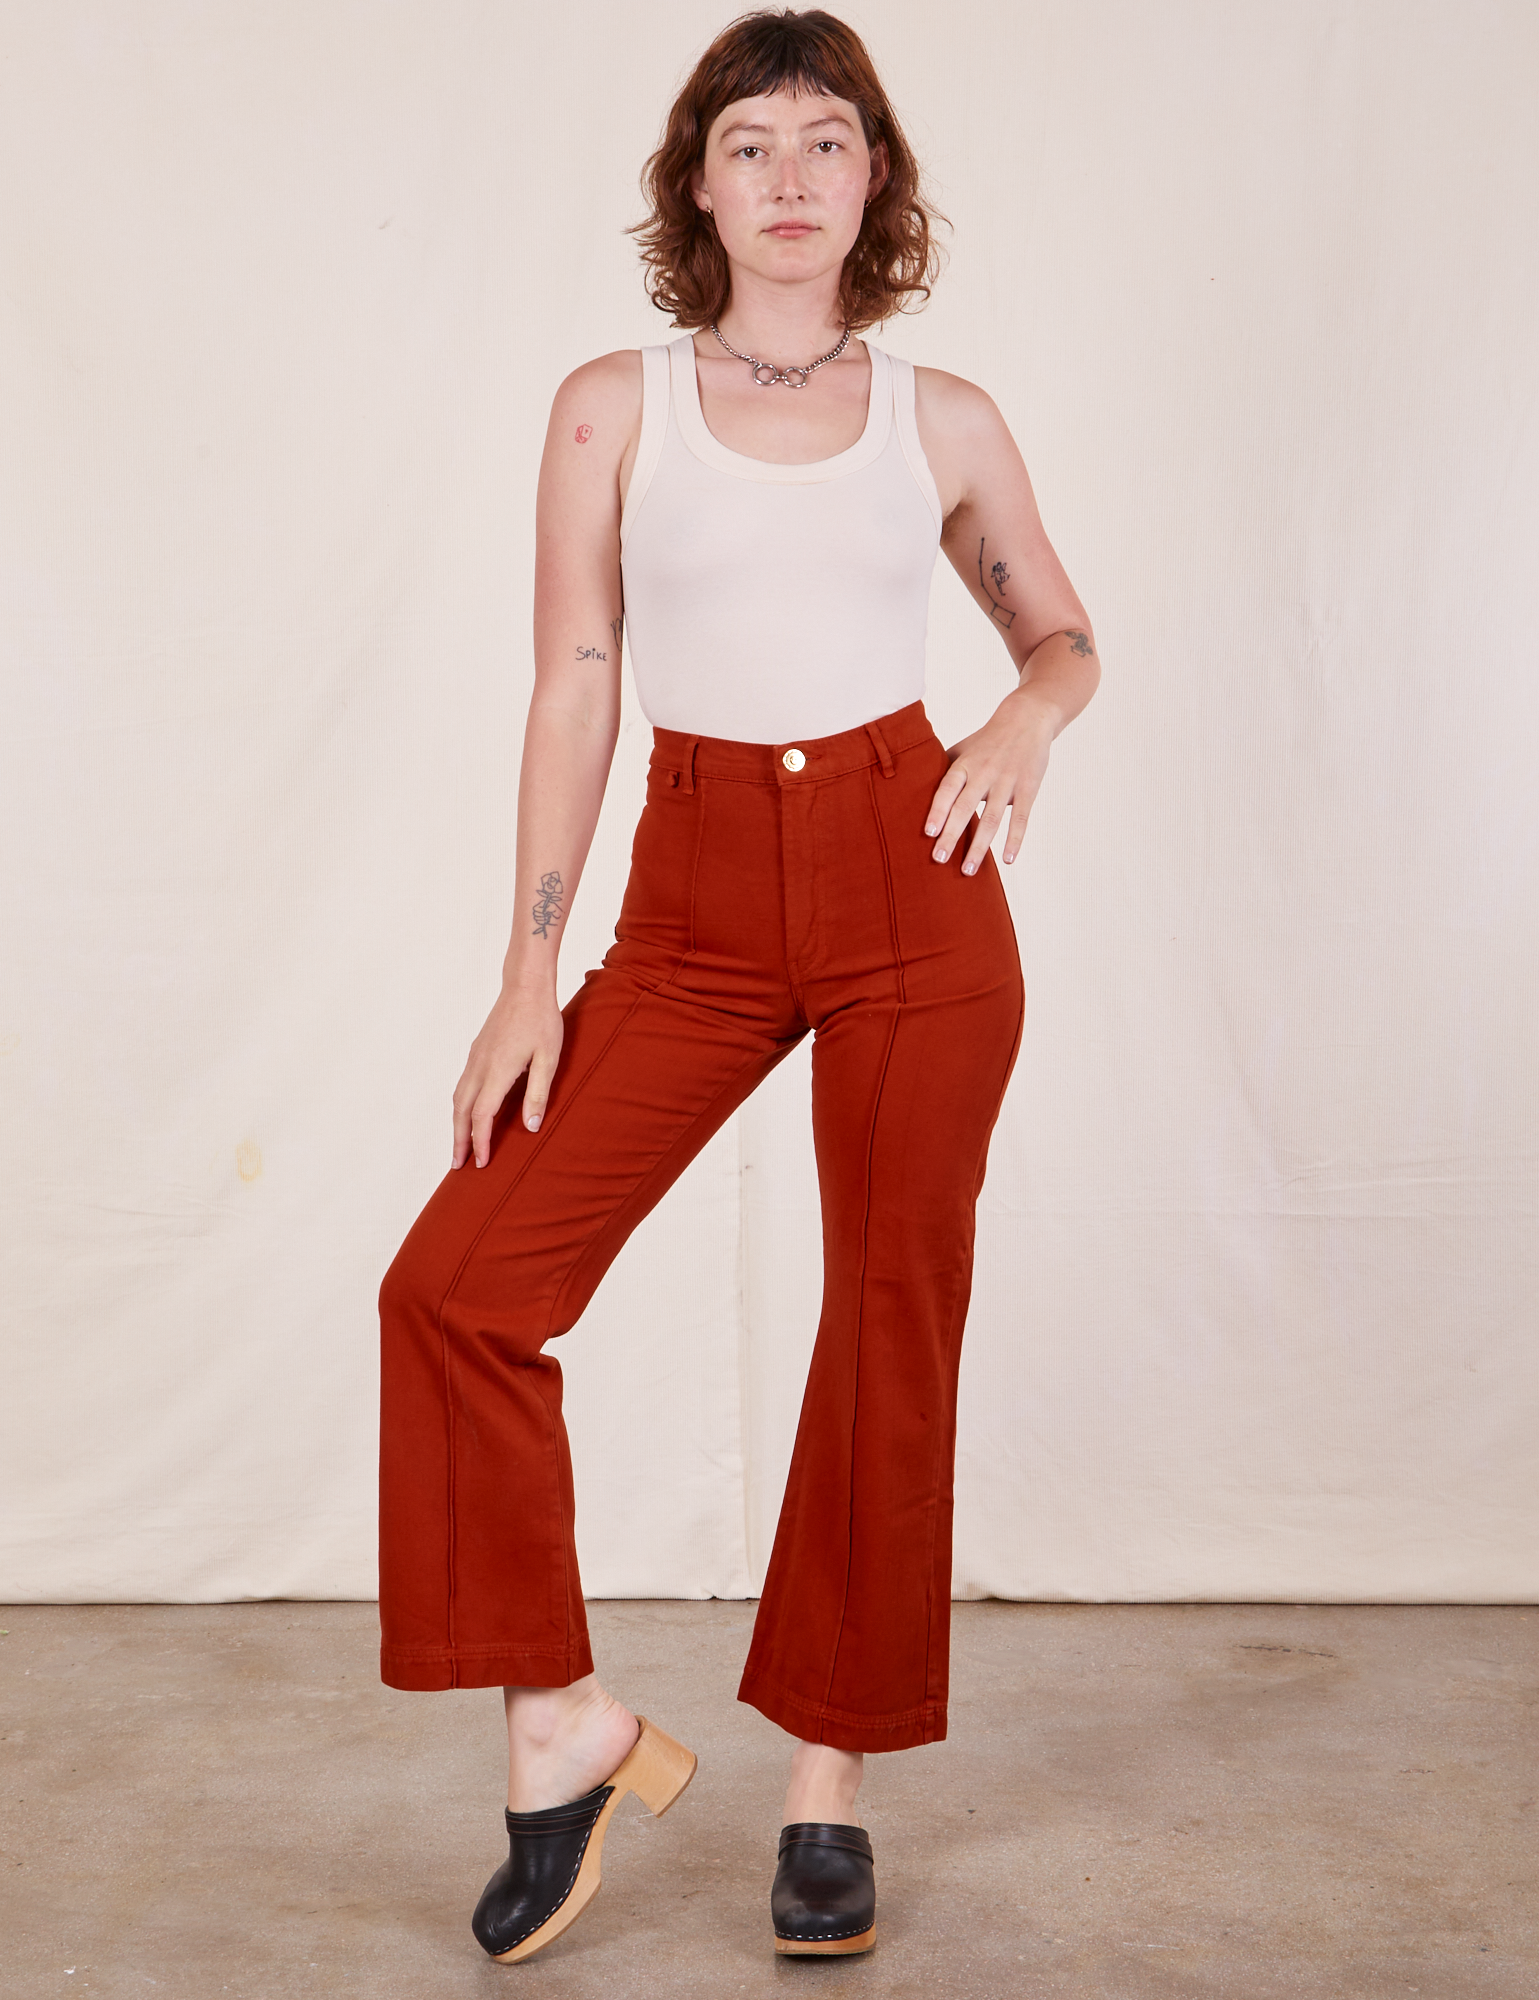 Alex is 5&#39;8&quot; and wearing XS Western Pants in Paprika and Tank Top in vintage tee off-white